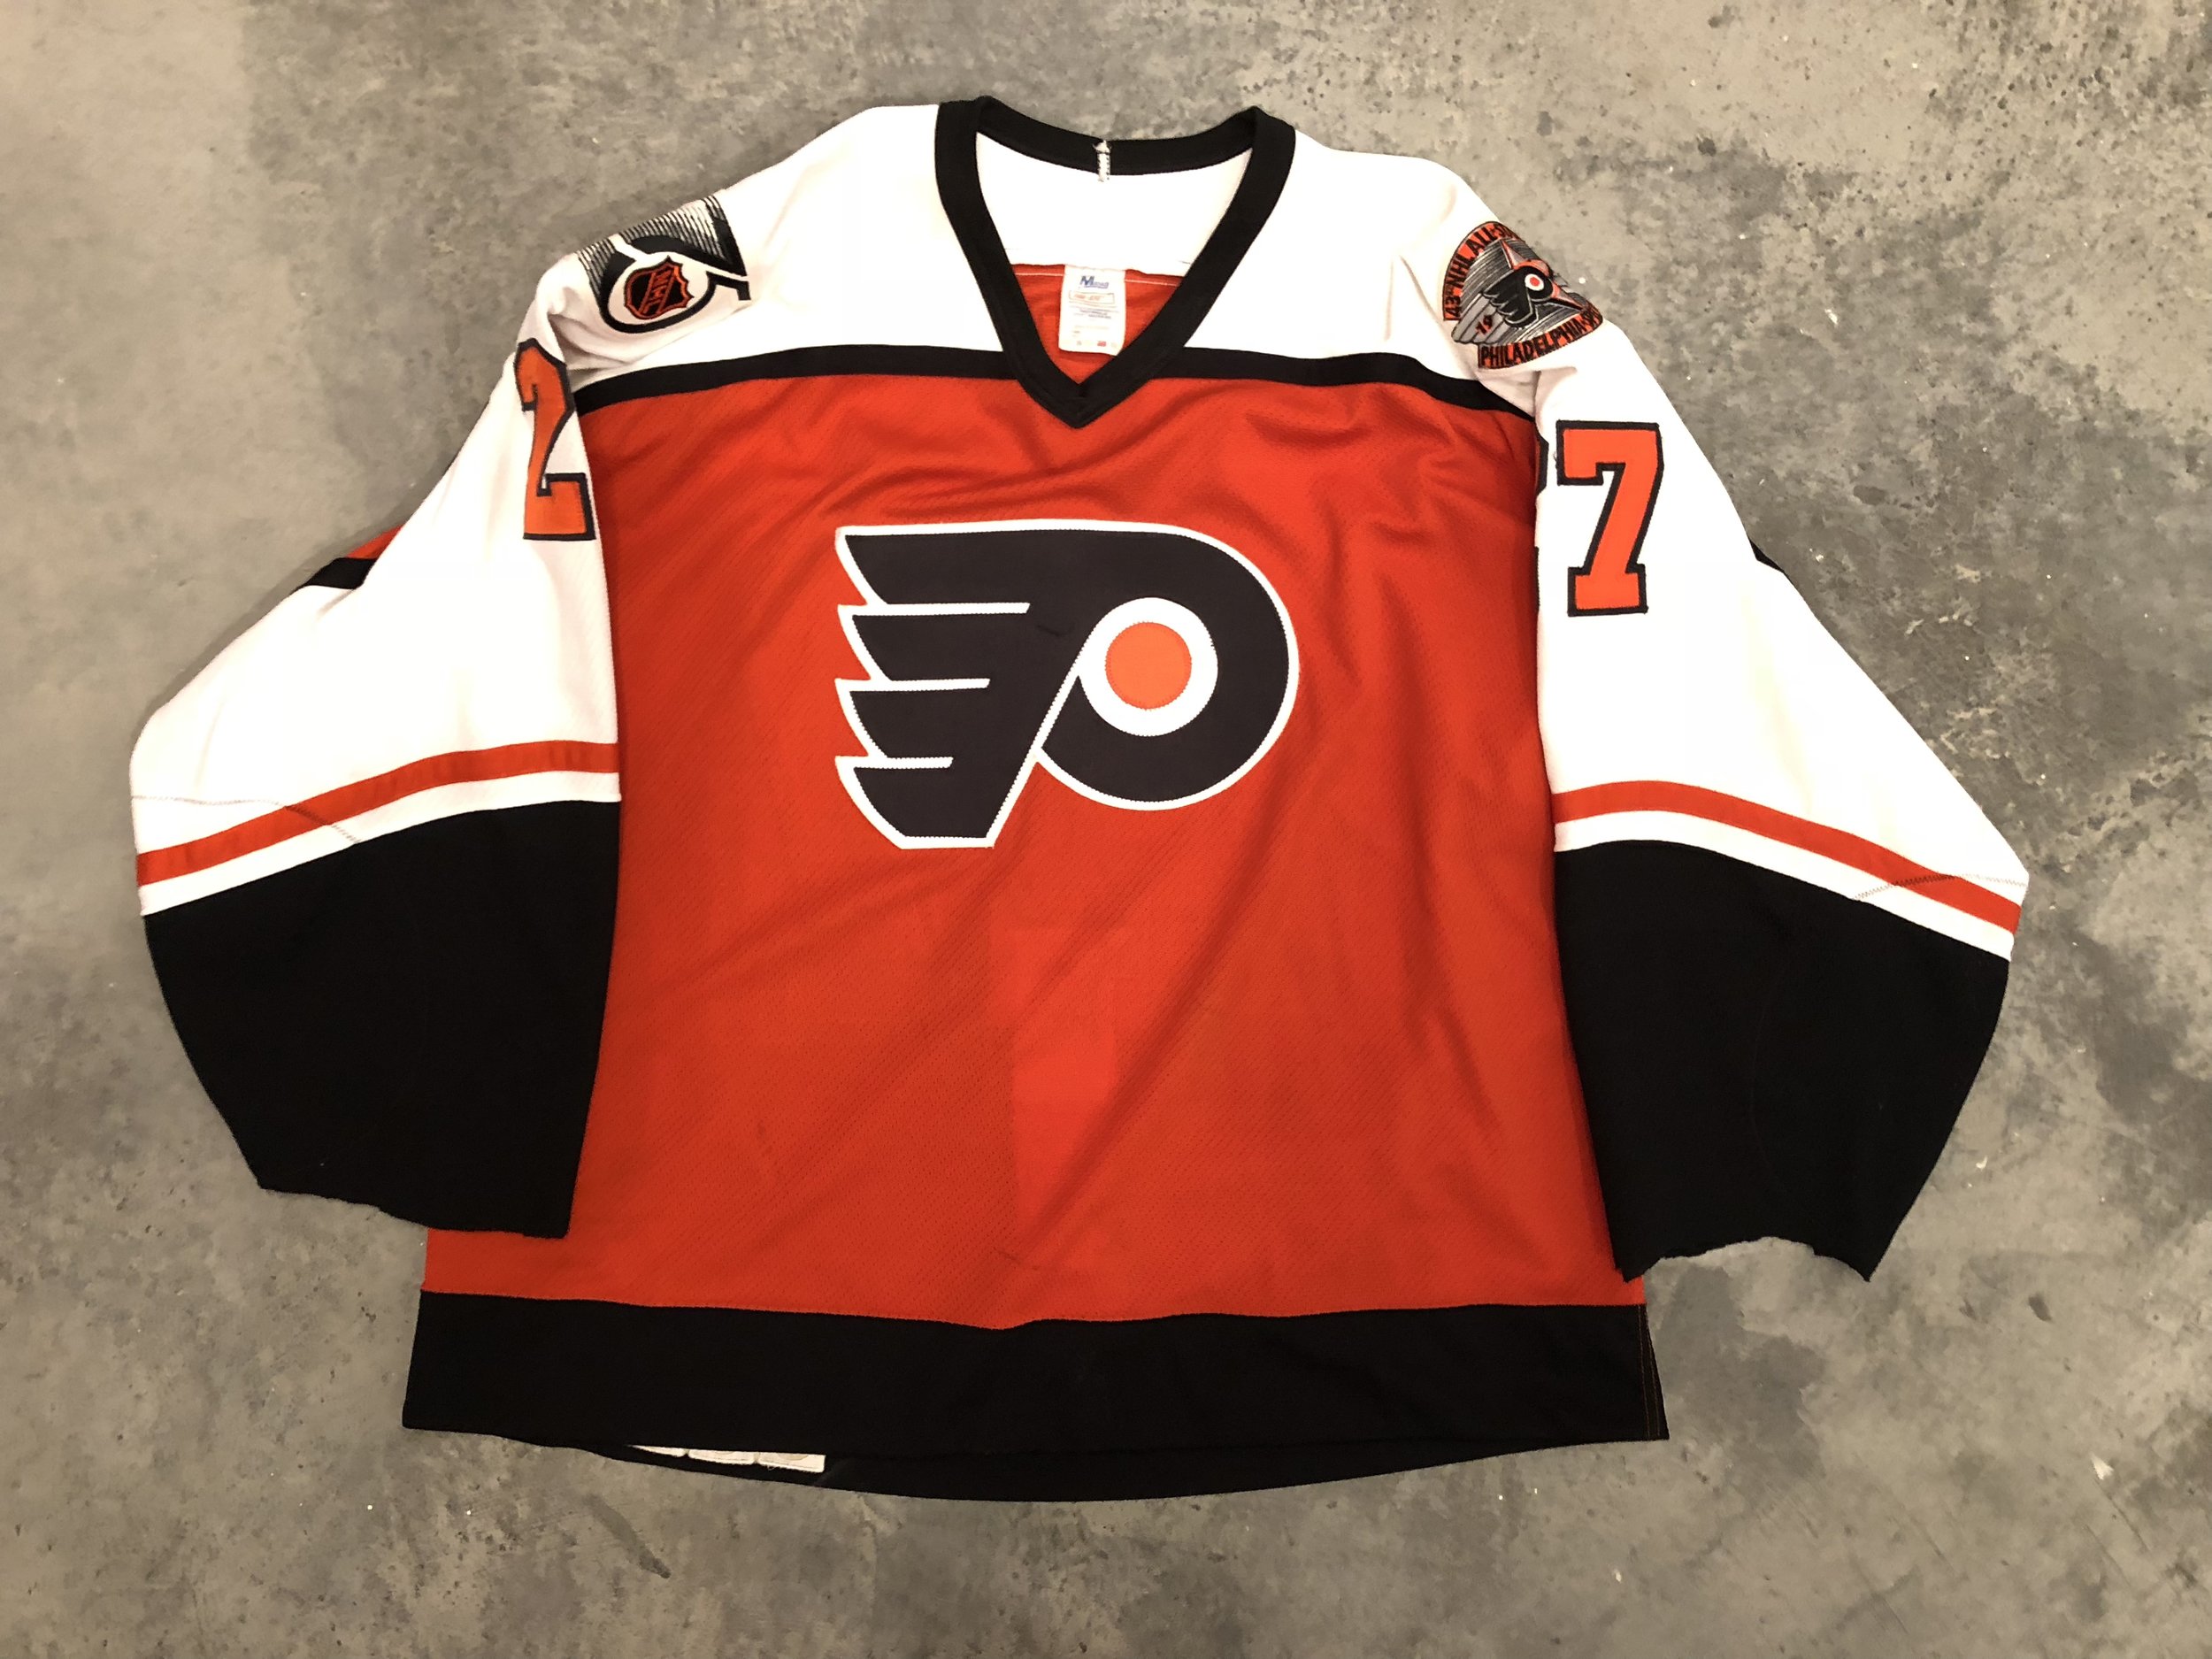 ron hextall jersey number